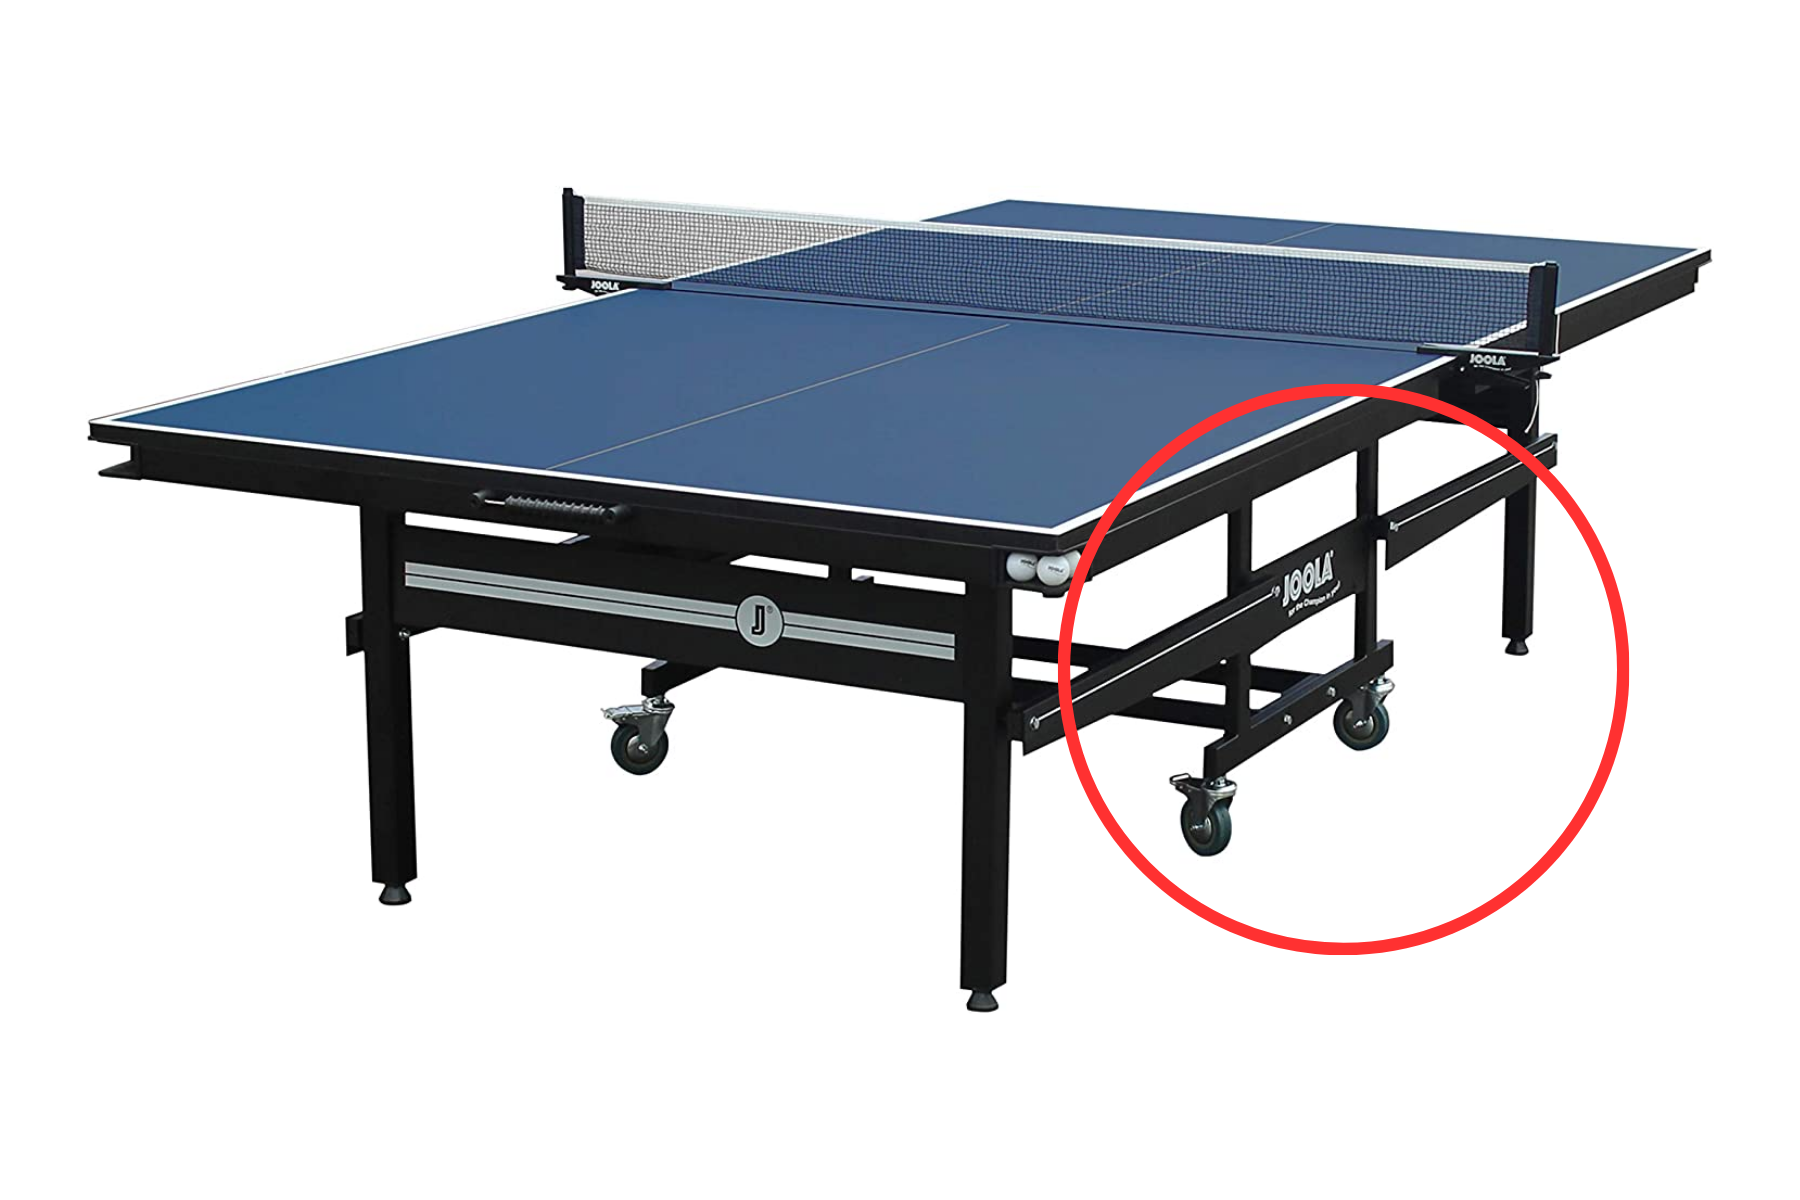 At the bottom is a ping-pong table with extra accouterments